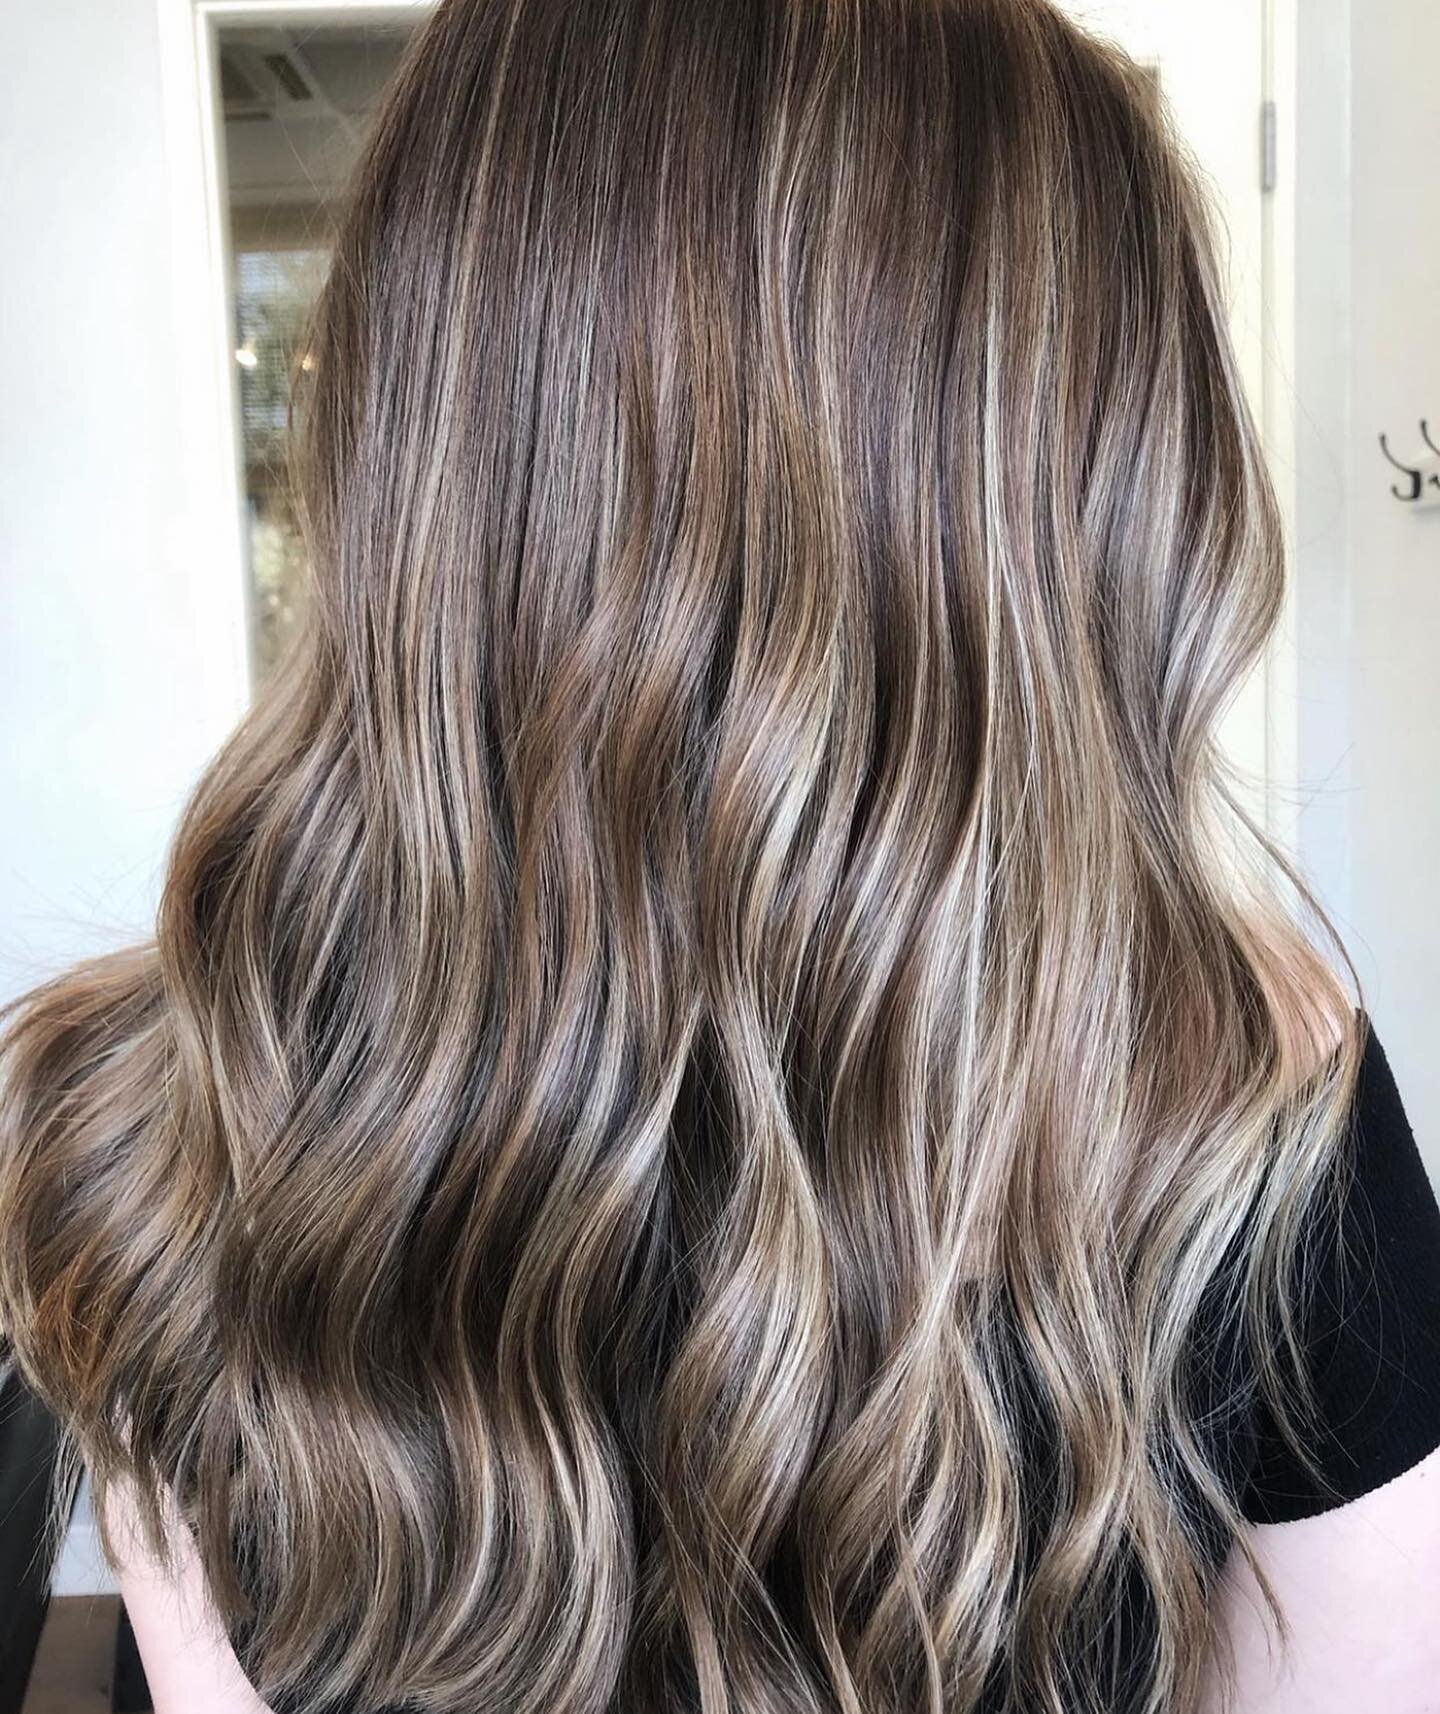 @hairmama123 bringing the shine✨
By @hairmama123

Studio 55 Salons is a premier provider of private salon suites in Sacramento, Roseville and Folsom. 

#studio55salons